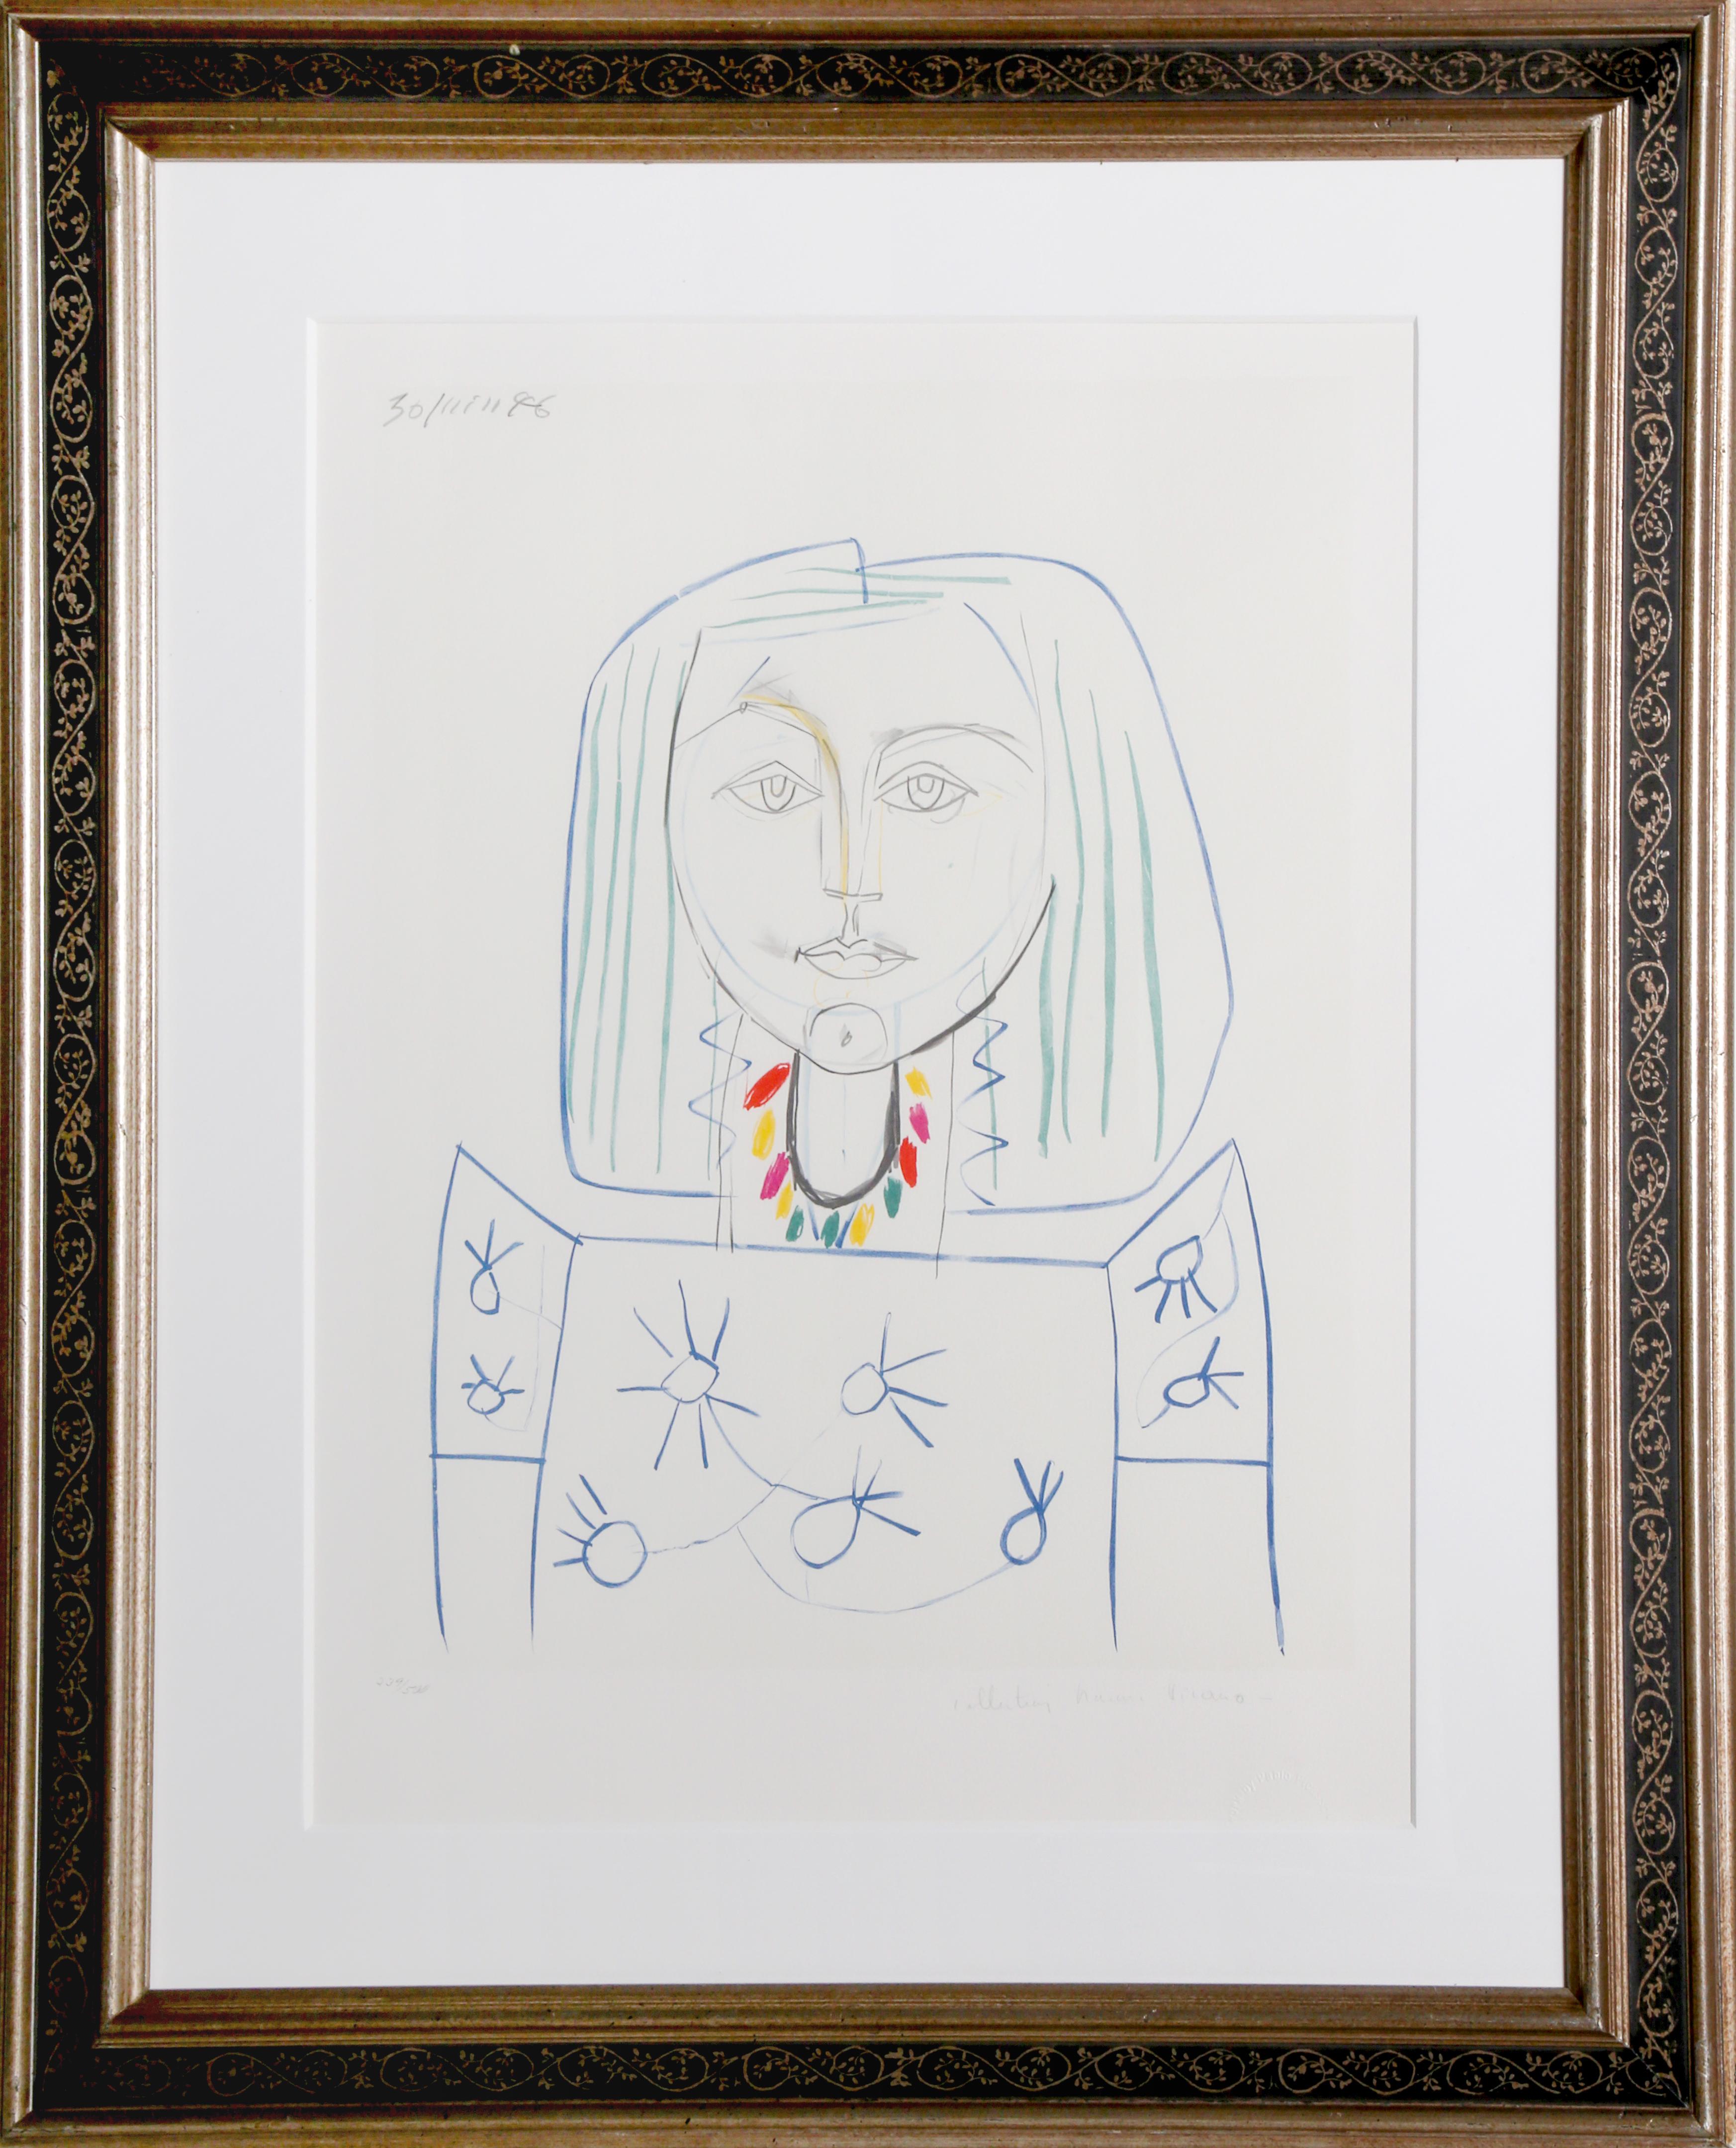 A lithograph from the Marina Picasso Estate Collection after the Pablo Picasso painting "Nature Morte a la Porte et a la Clef".  The original painting was completed in 1946. In the 1970's after Picasso's death, Marina Picasso, his granddaughter,